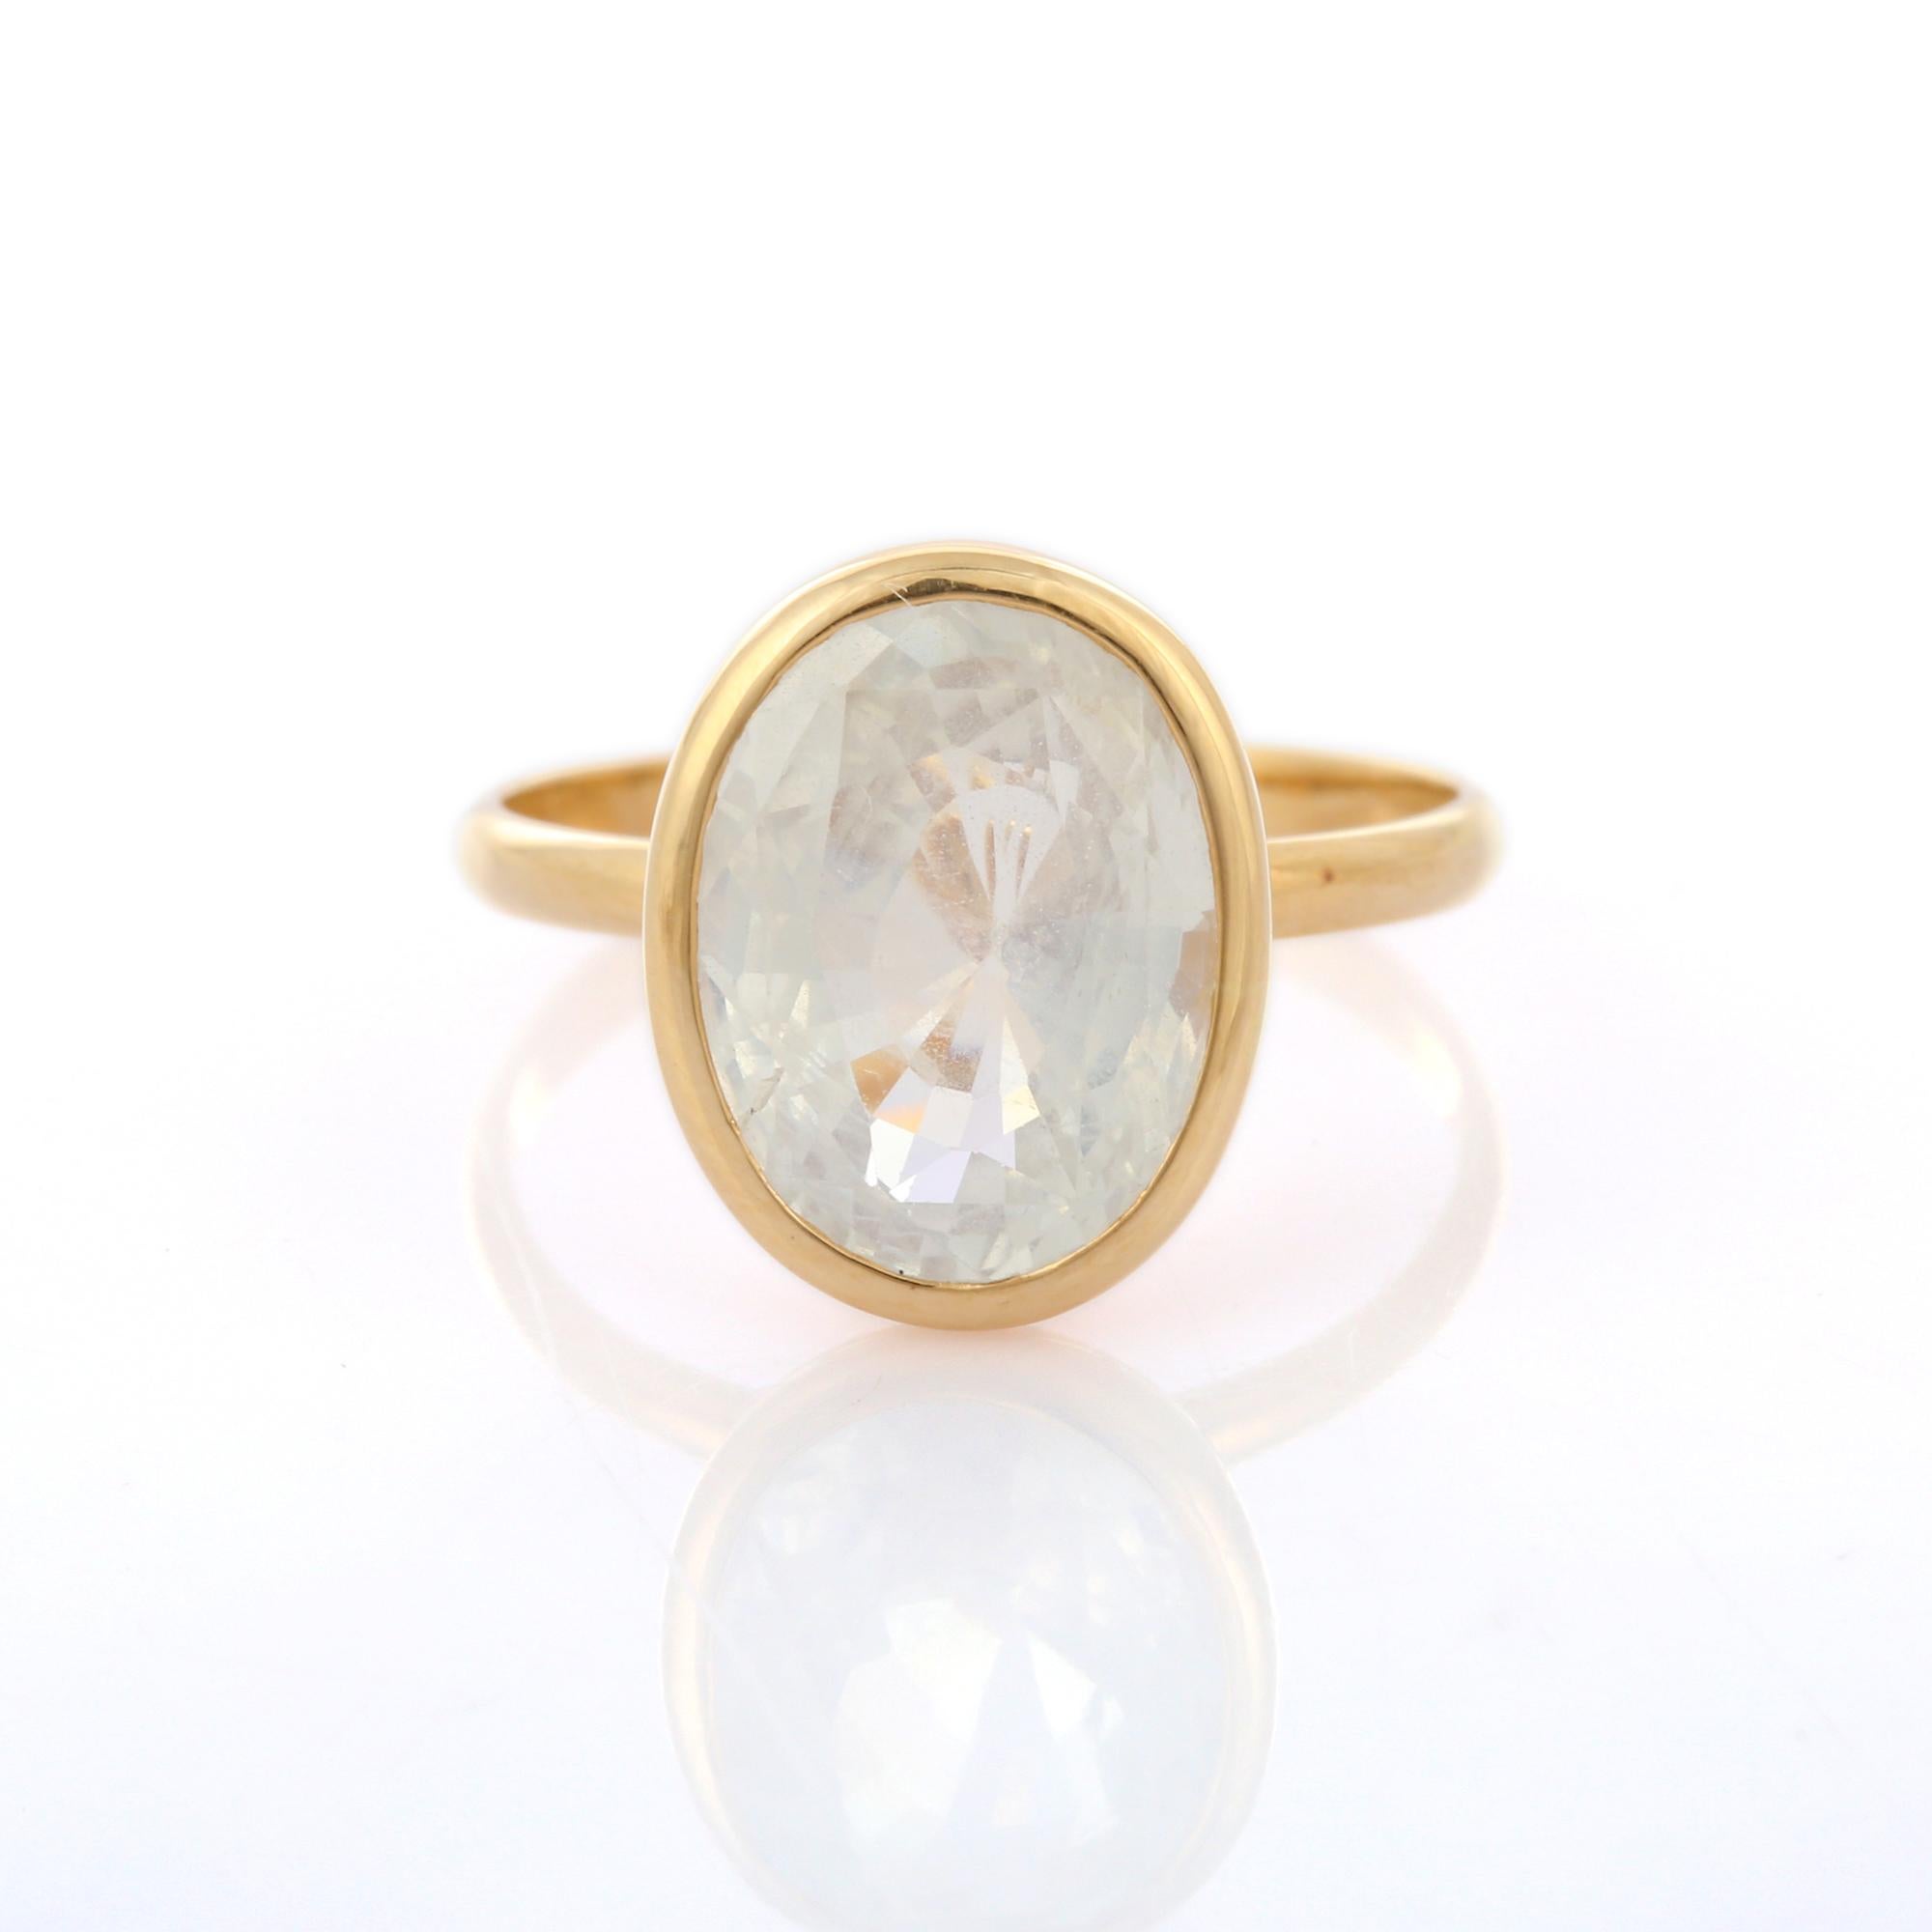 Oval Cut White Sapphire Cocktail Ring in 18K Yellow Gold 5